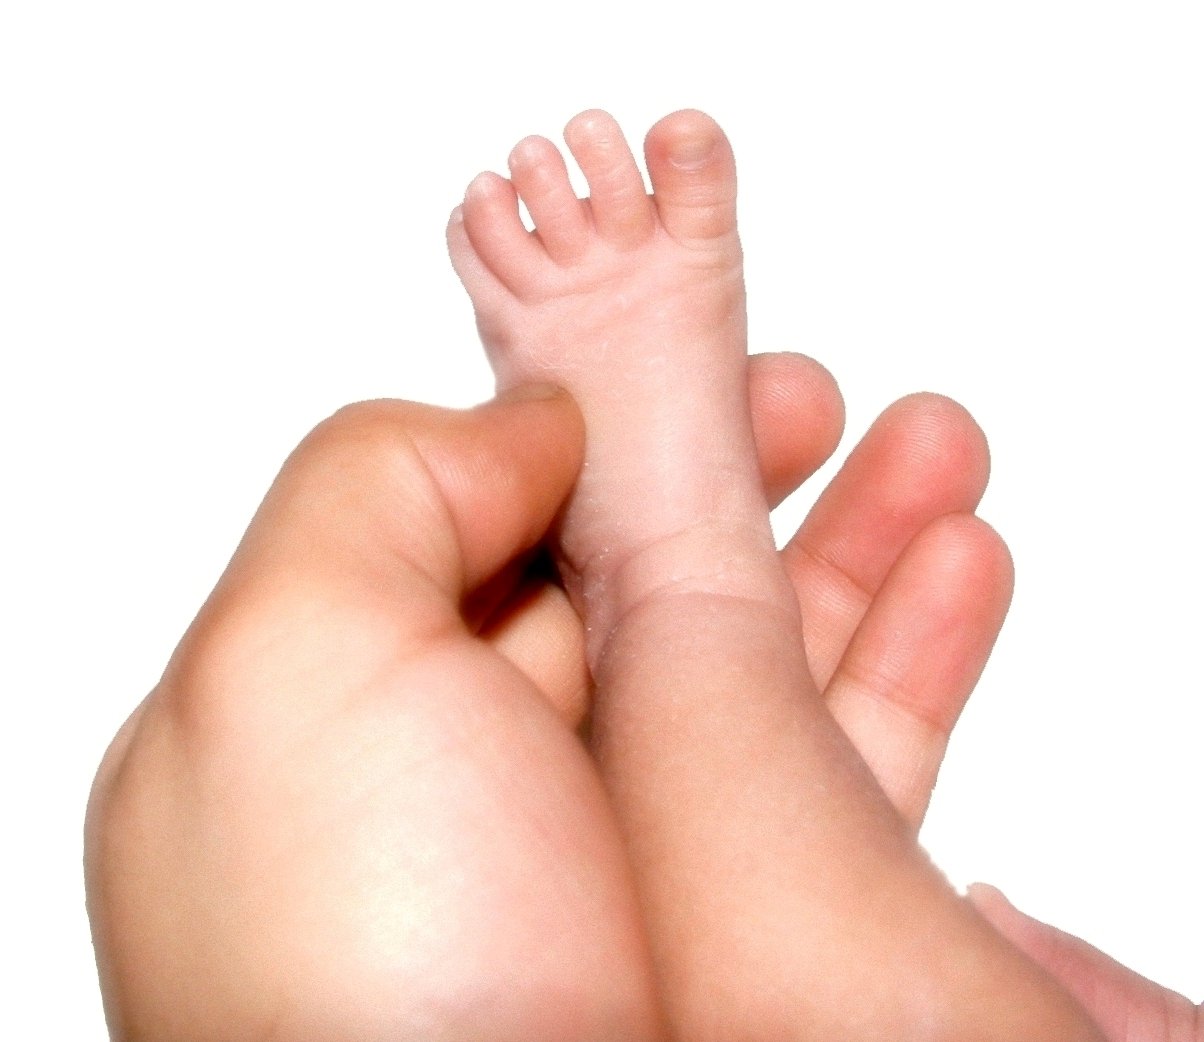 a pair of feet with baby toes in between them